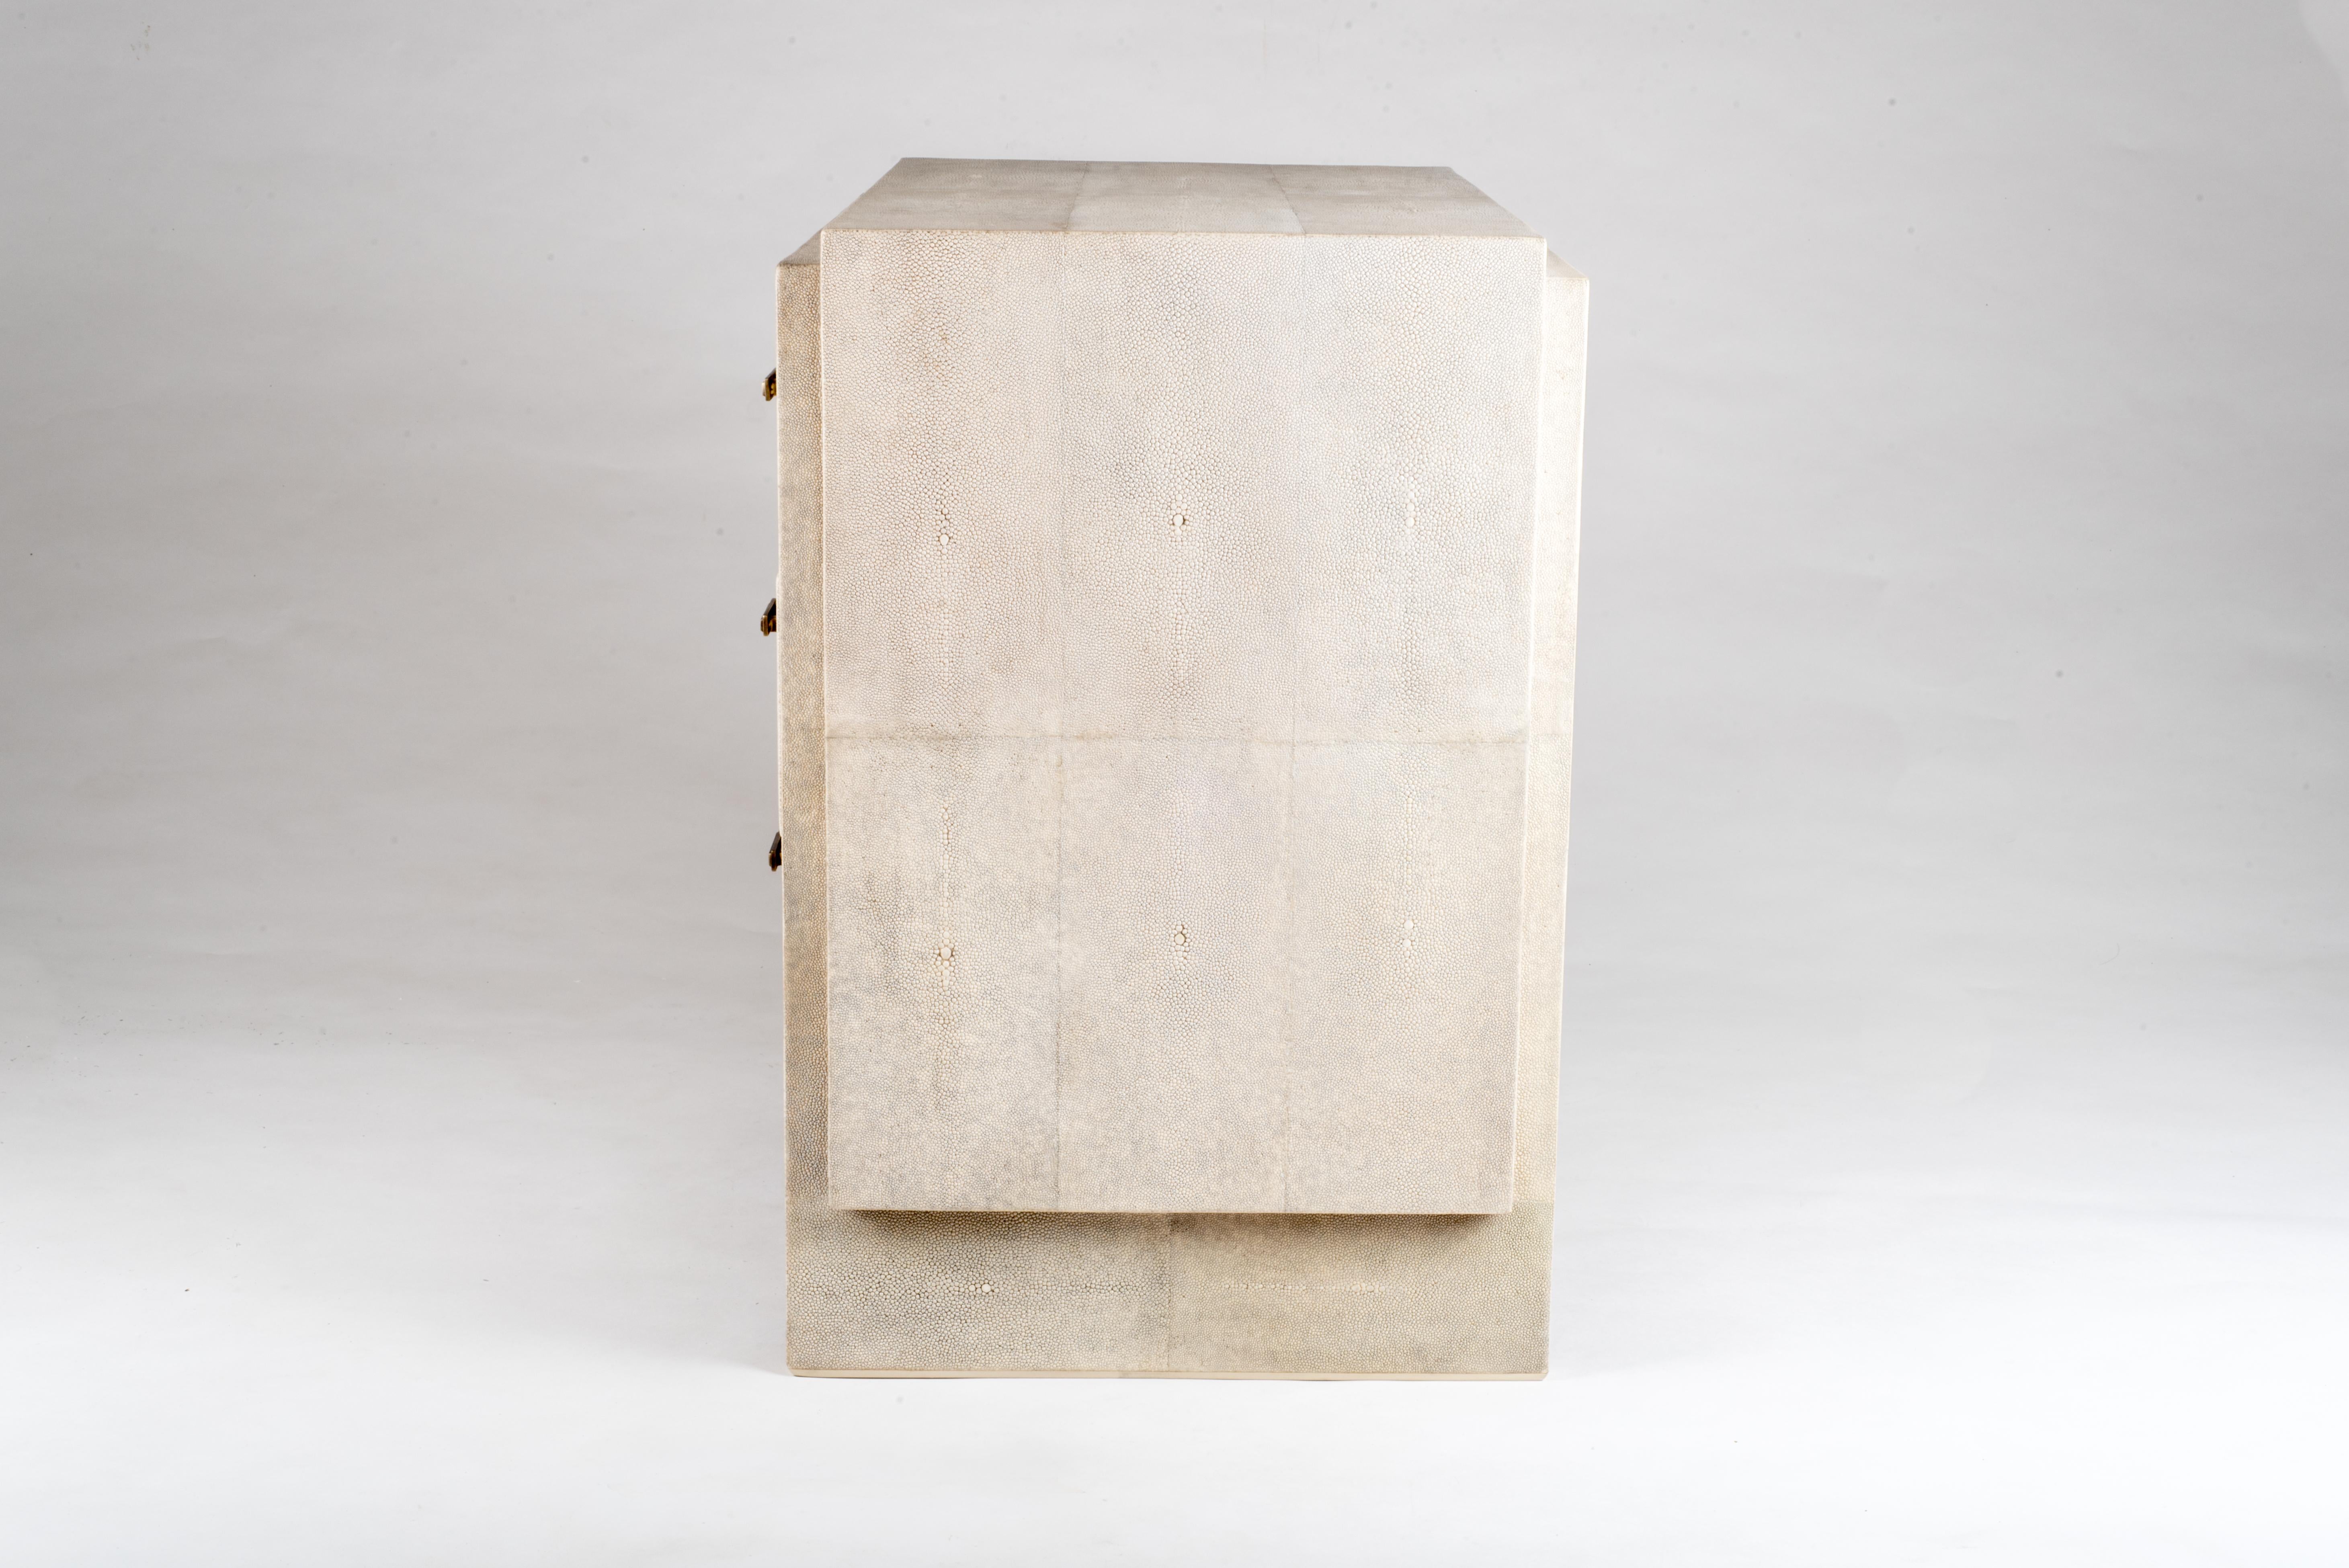 Art Deco Iconic Bedside Table with Beveled Drawers in Cream Shagreen by R&Y Augousti